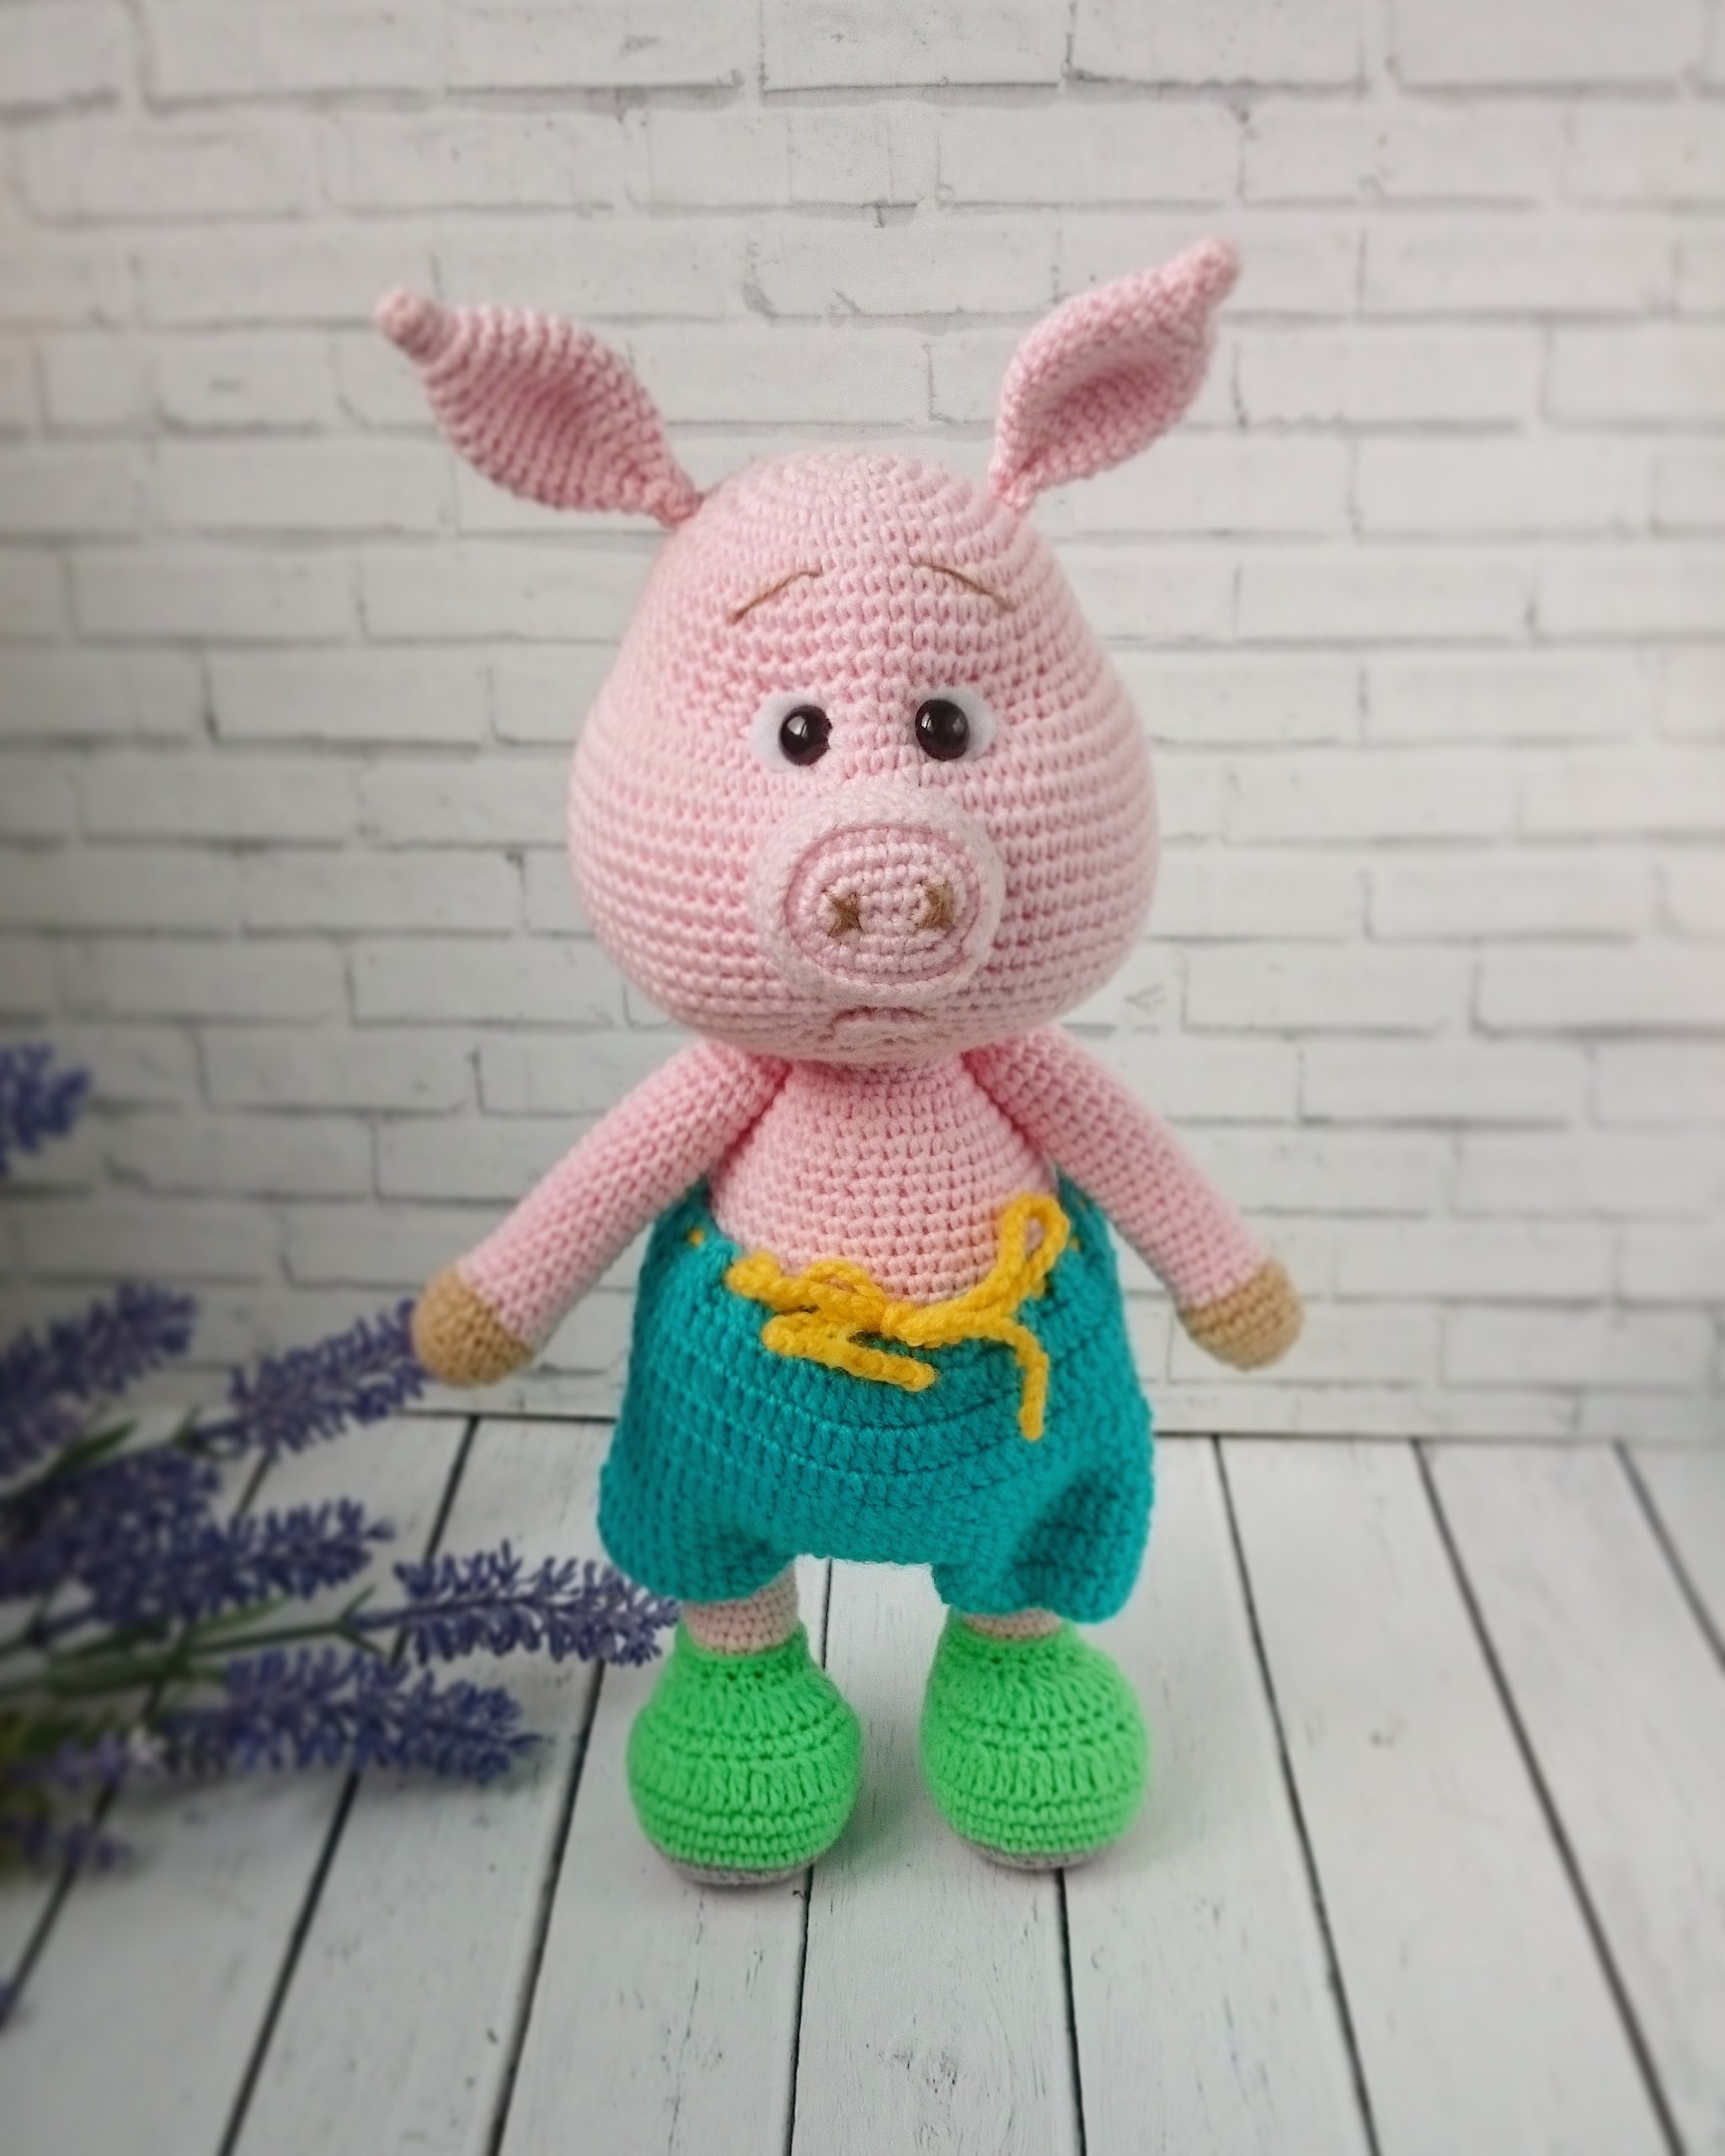 The knitting hobby is back - My, Needlework without process, Hobby, Knitted toys, Longpost, Needlework, Crochet